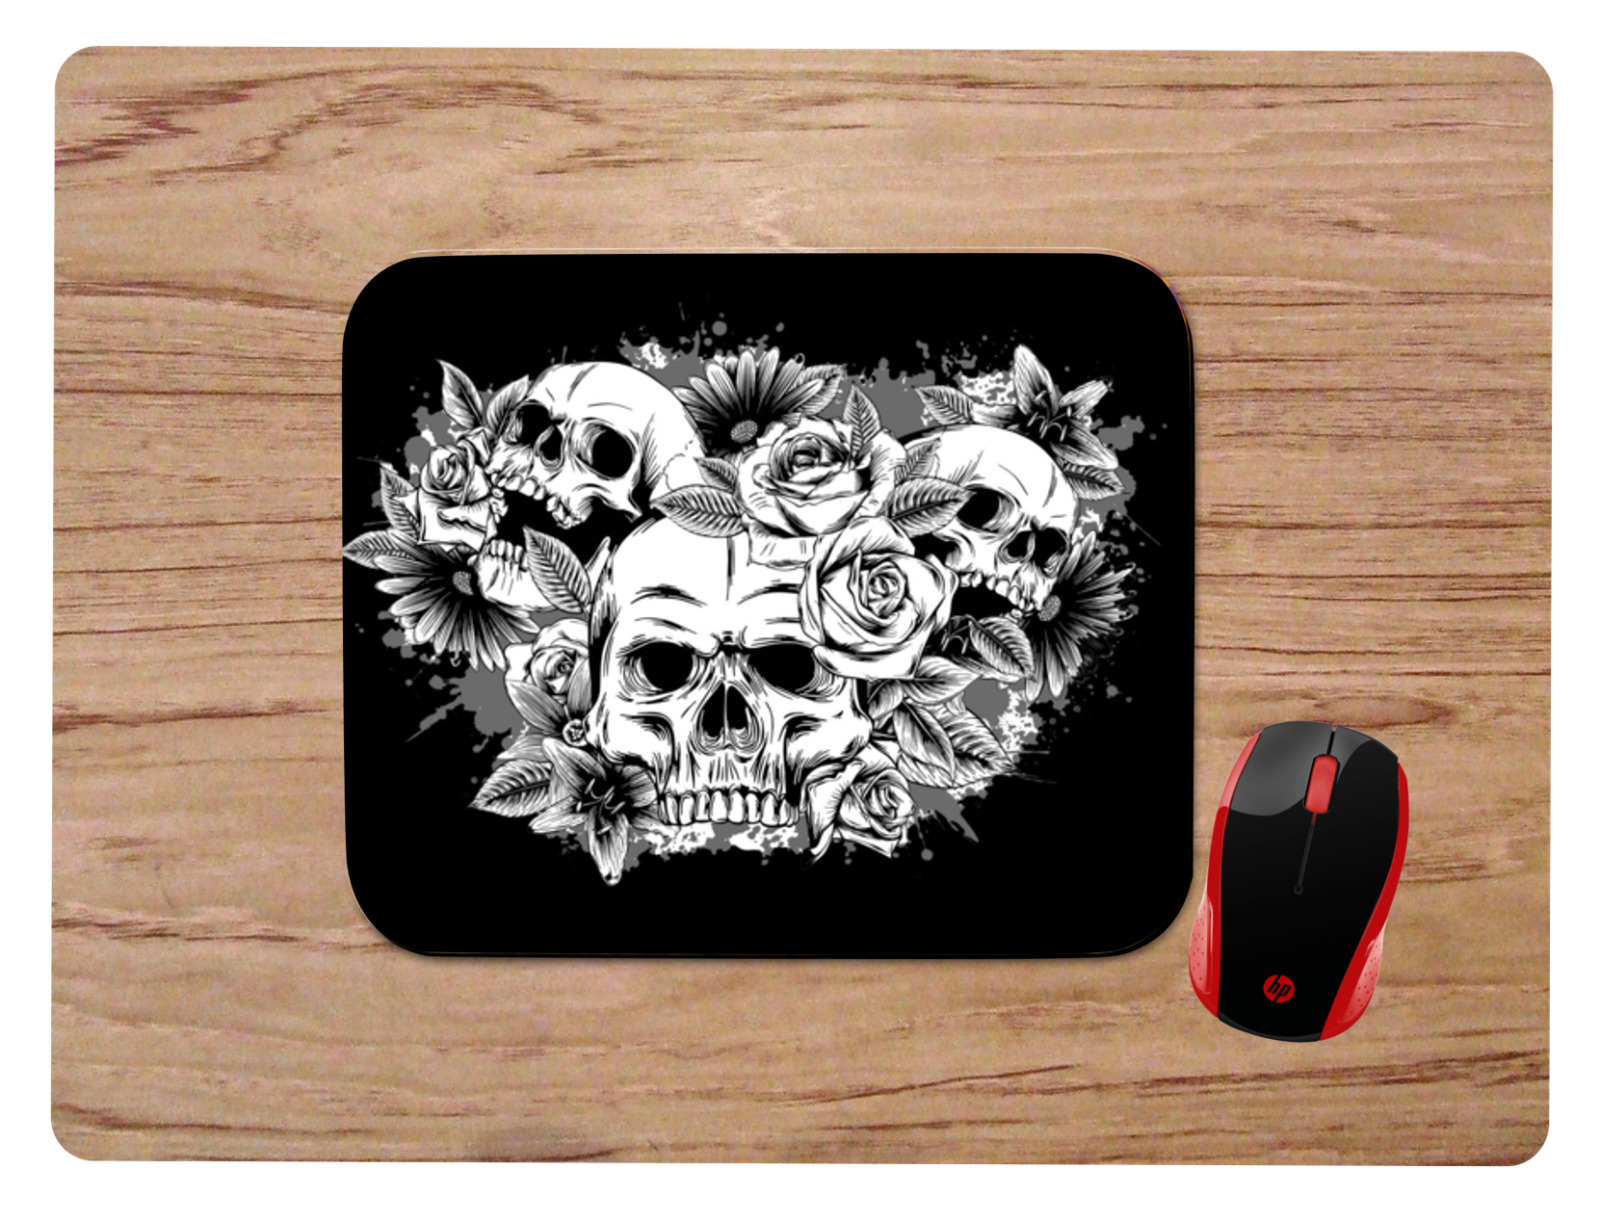 SKULL AND ROSES BLACK AND WHITE MOUSE PAD DESK MAT HOME OFFICE GR8 GIFT